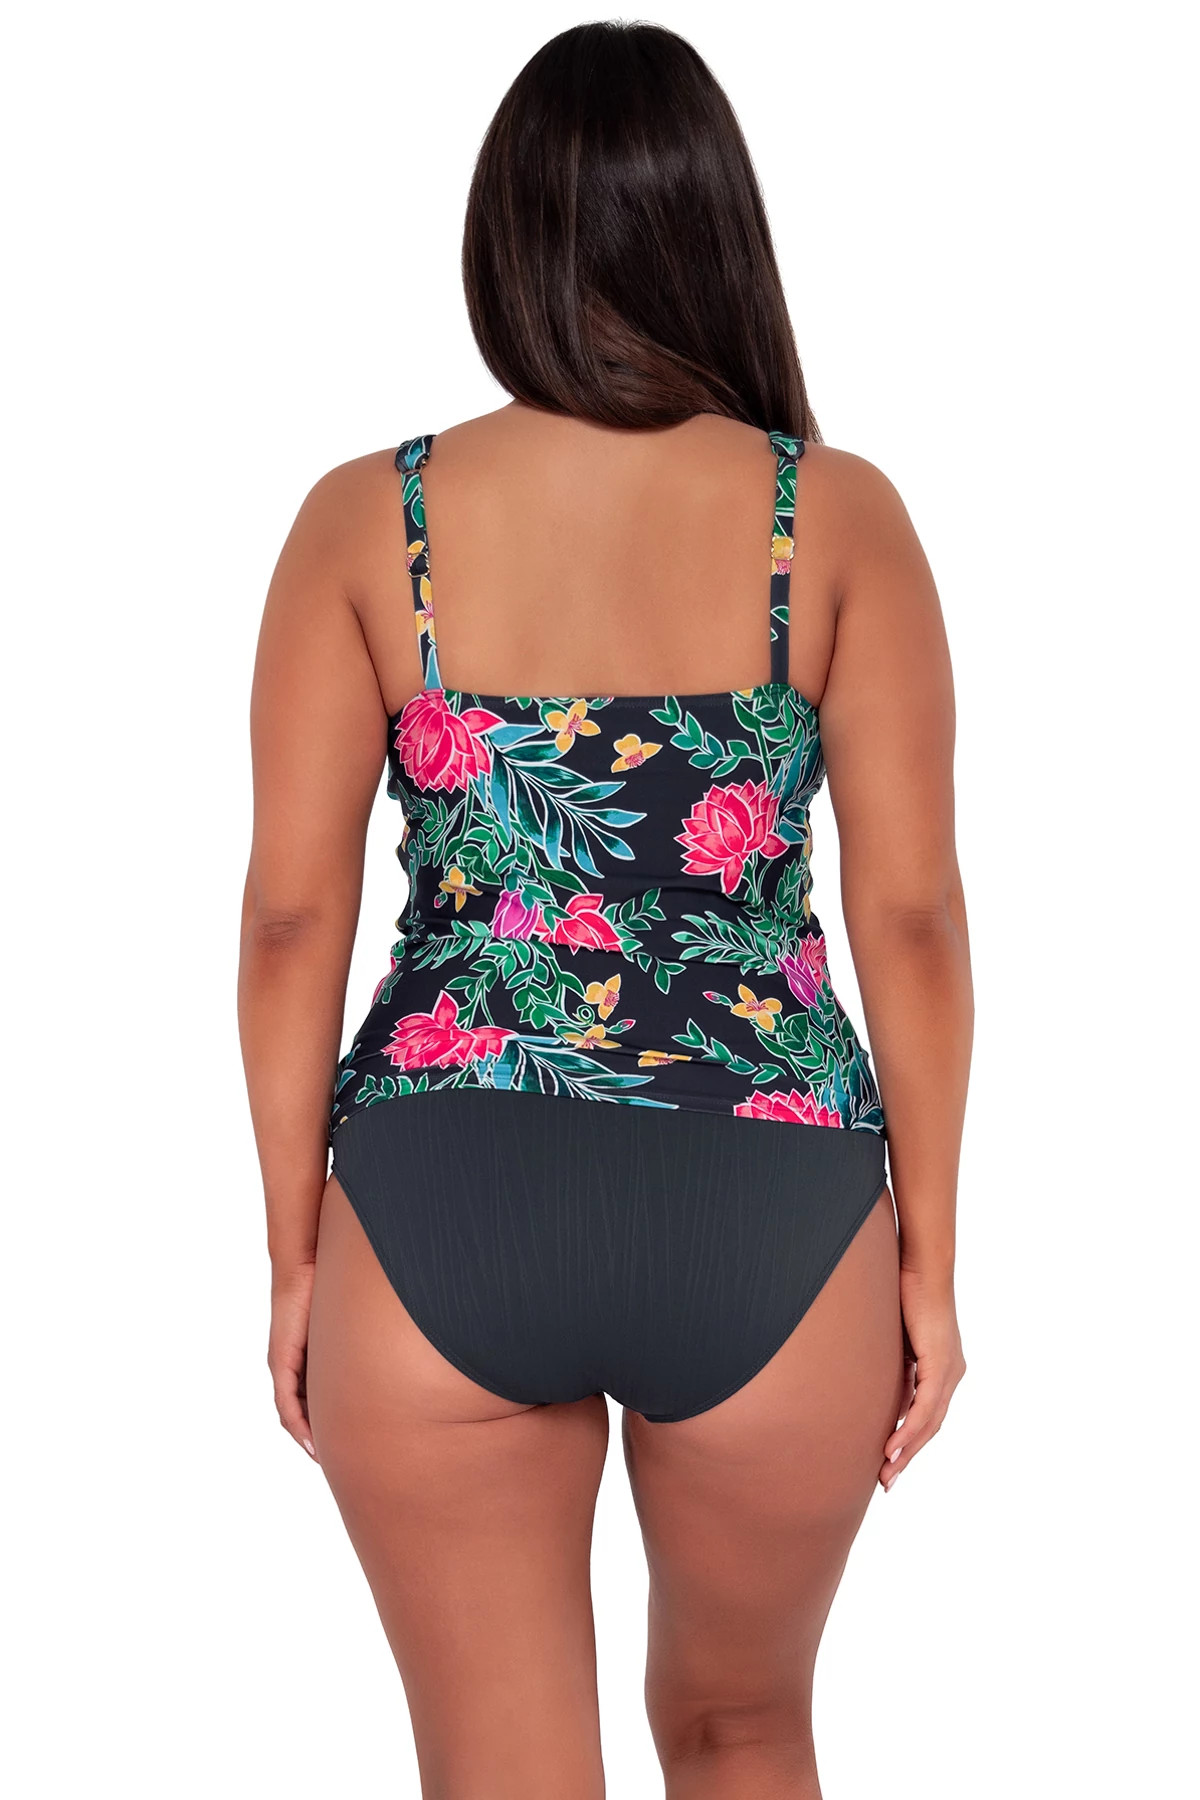 TWILIGHT BLOOMS Emerson Tankini Top image number 3